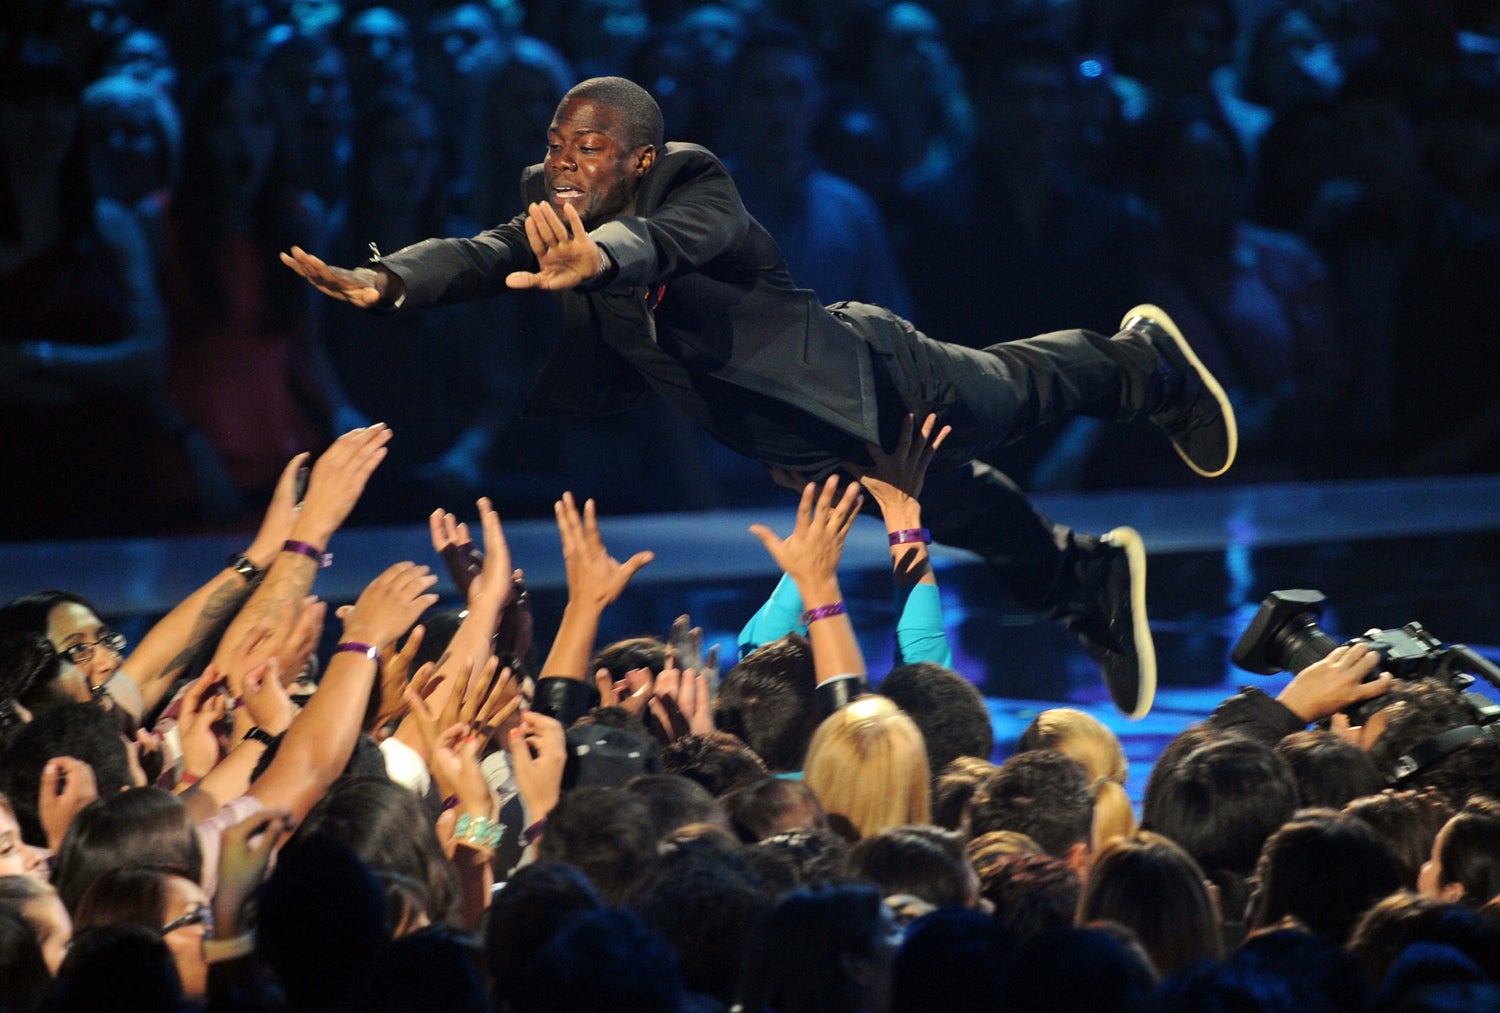 Live from the 2012 MTV Video Music Awards